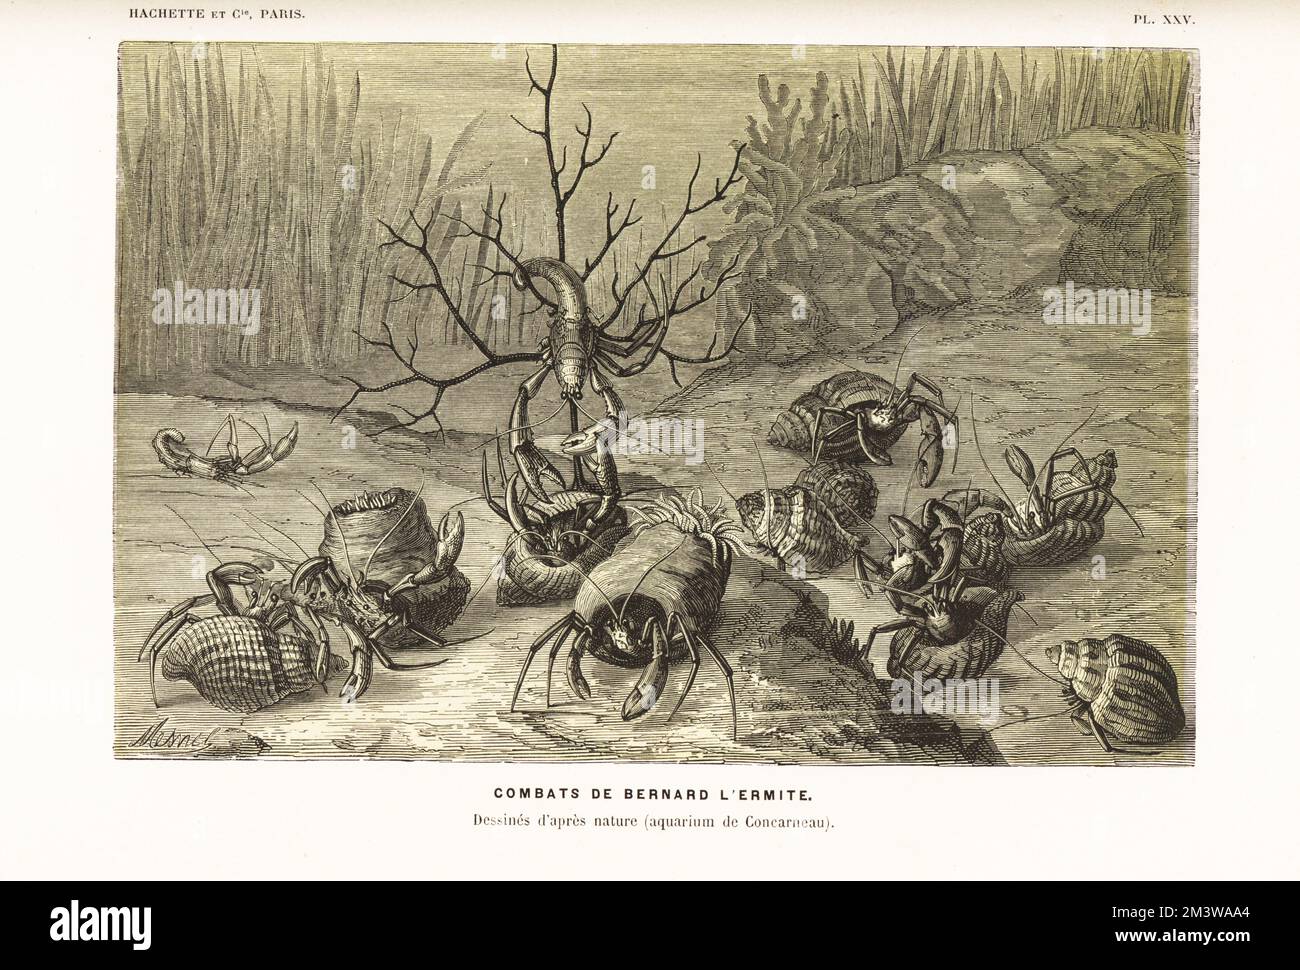 Hermit crabs, Pagurus bernhardus, fighting over shells. Drawn after nature by Olivier Fredol at Concarneau aquarium. Chromolithograph by A. Mesnel from Alfred Fredol’s Le Monde de la Mer, the World of the Sea, edited by Olivier Fredol, Librairie Hachette et. Cie., Paris, 1881. Alfred Fredol was the pseudonym of French zoologist and botanist Alfred Moquin-Tandon, 1804-1863. Stock Photo